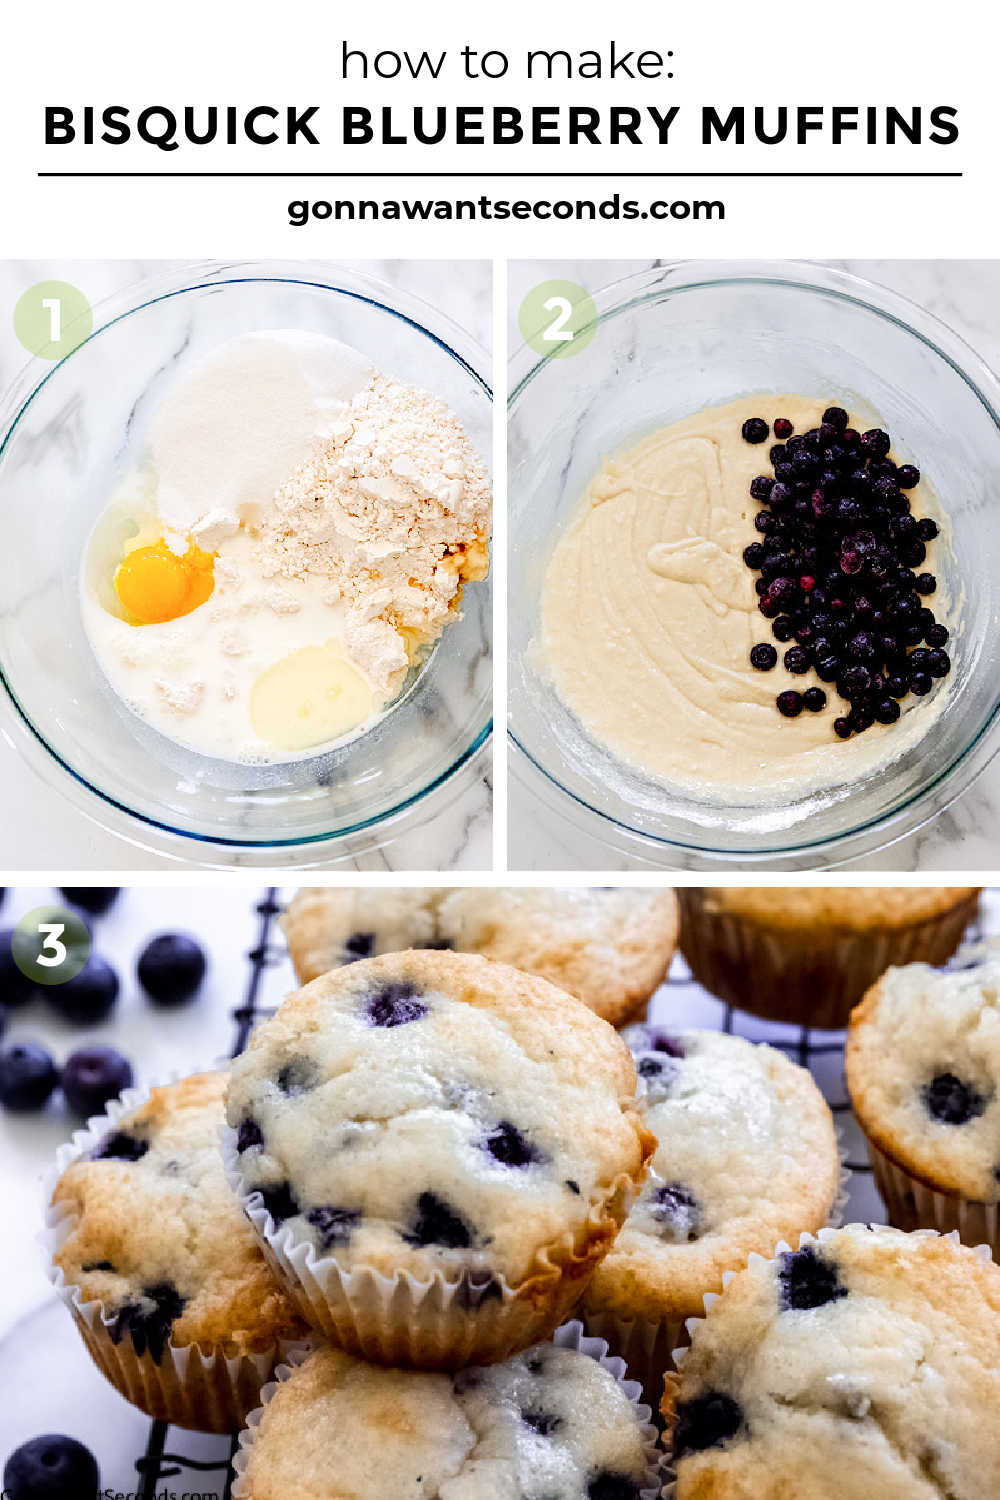 Step by step how to make Bisquick Blueberry Muffins